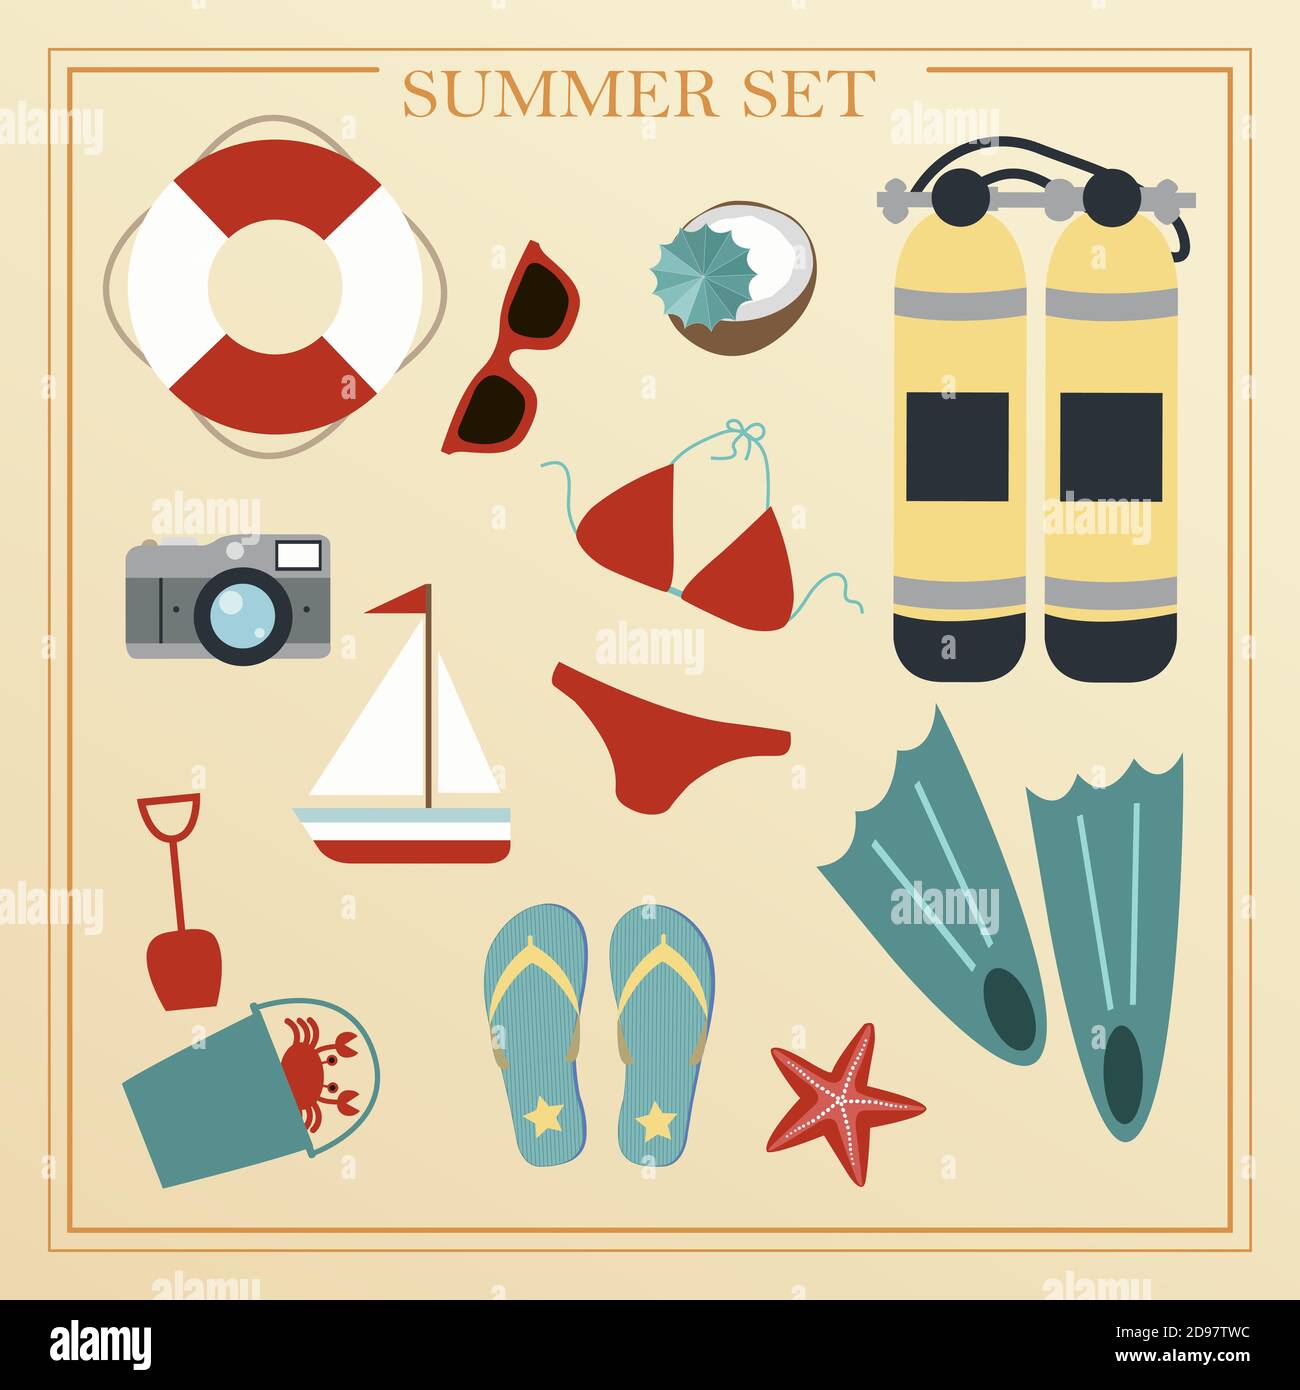 A set of flat beach summer items. Accessories for beach holidays by the sea. Swimsuit, diving cylinders, sunbed, camera and other icons for creating summer posters. Illustrations for ads, web, flyers, and banners. Stock Vector